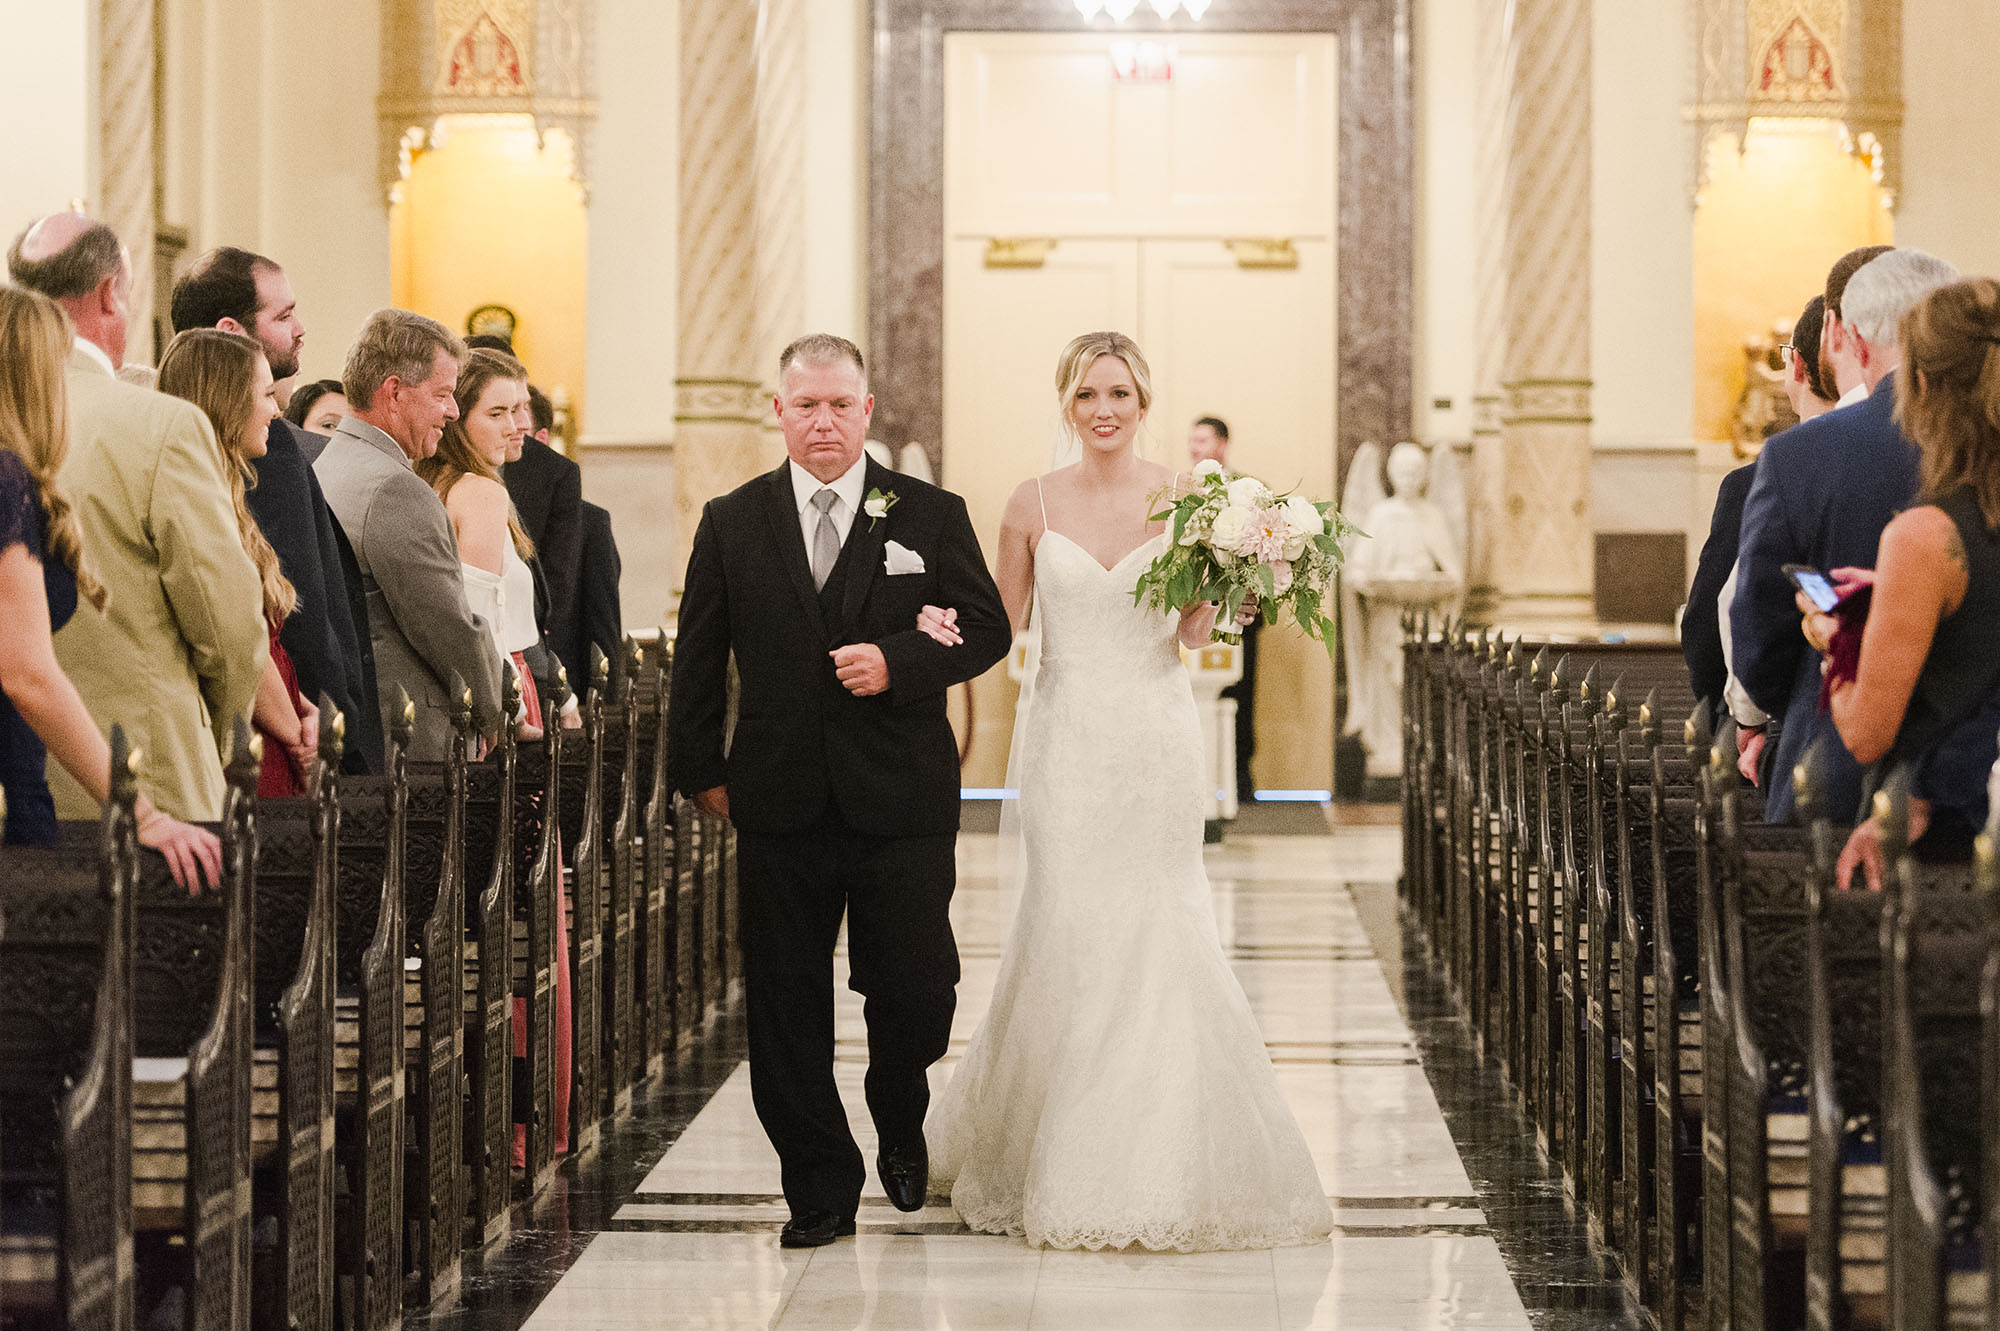 Bride and father walking down aisle